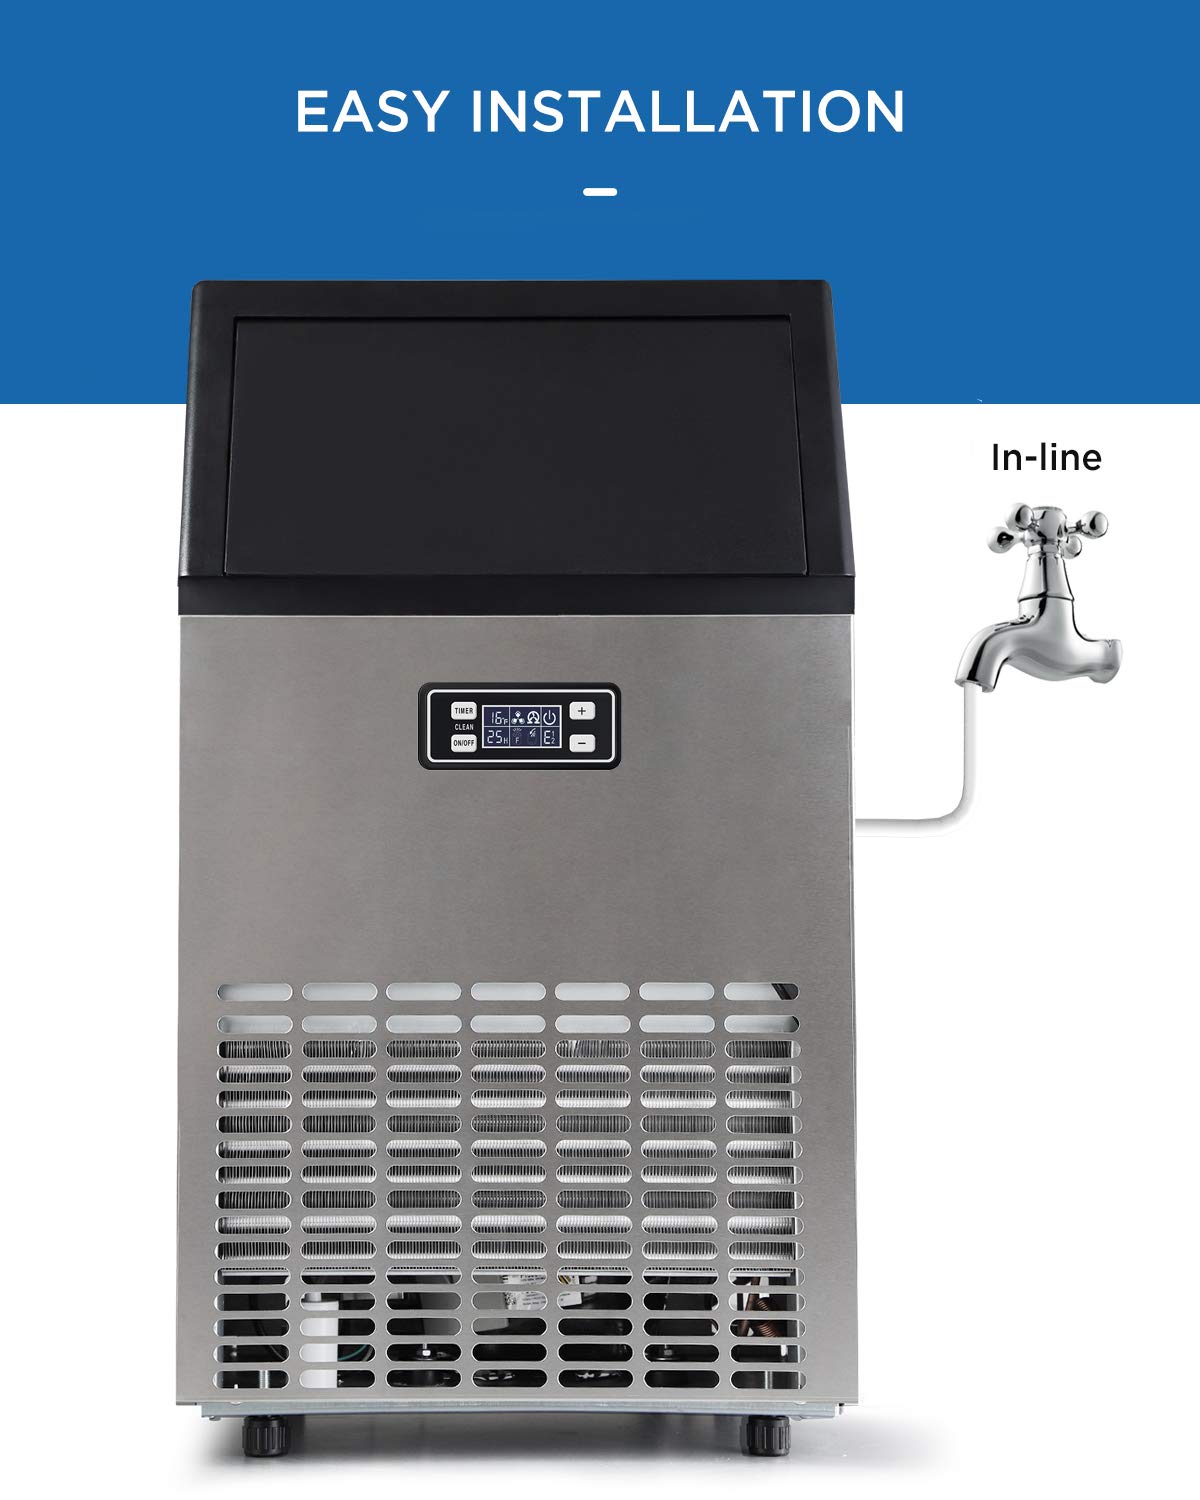 ADT Ice Machine Stainless Steel Under Counter Freestanding Commercial Ice Maker Machine